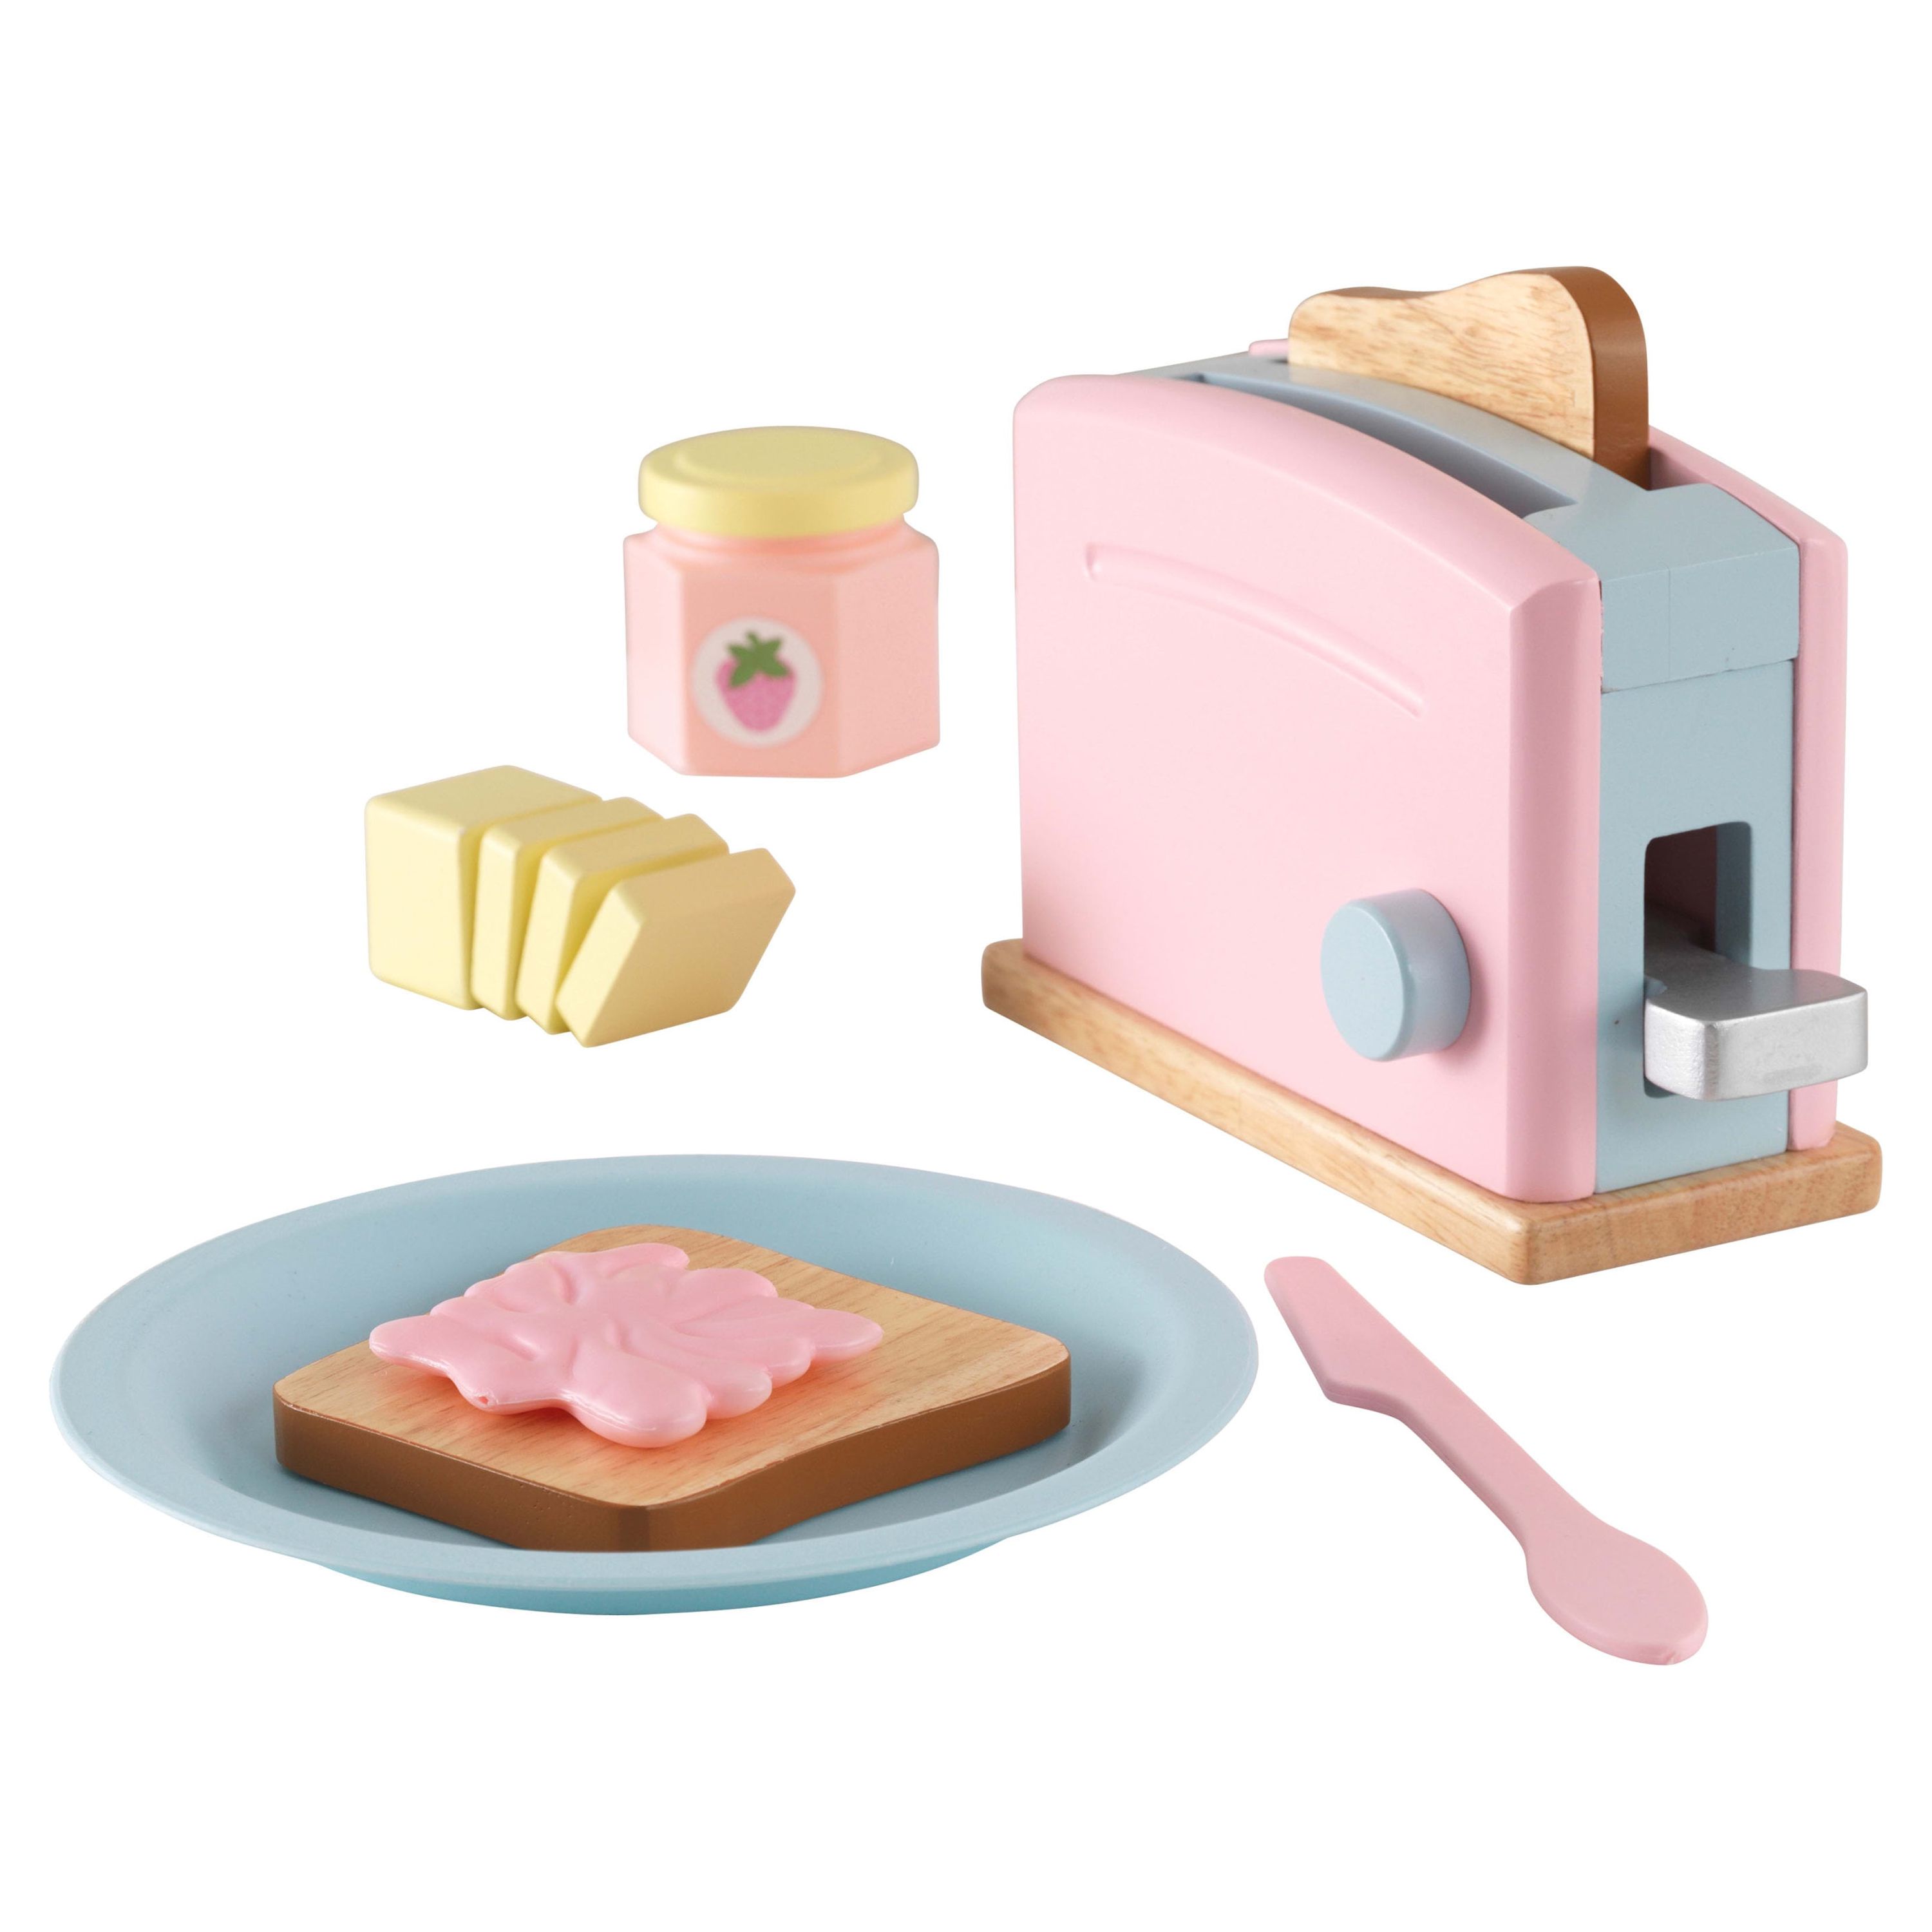 KidKraft Wooden Toaster Playset with 8 Pieces, Kitchen Toy - Pastel - image 1 of 3